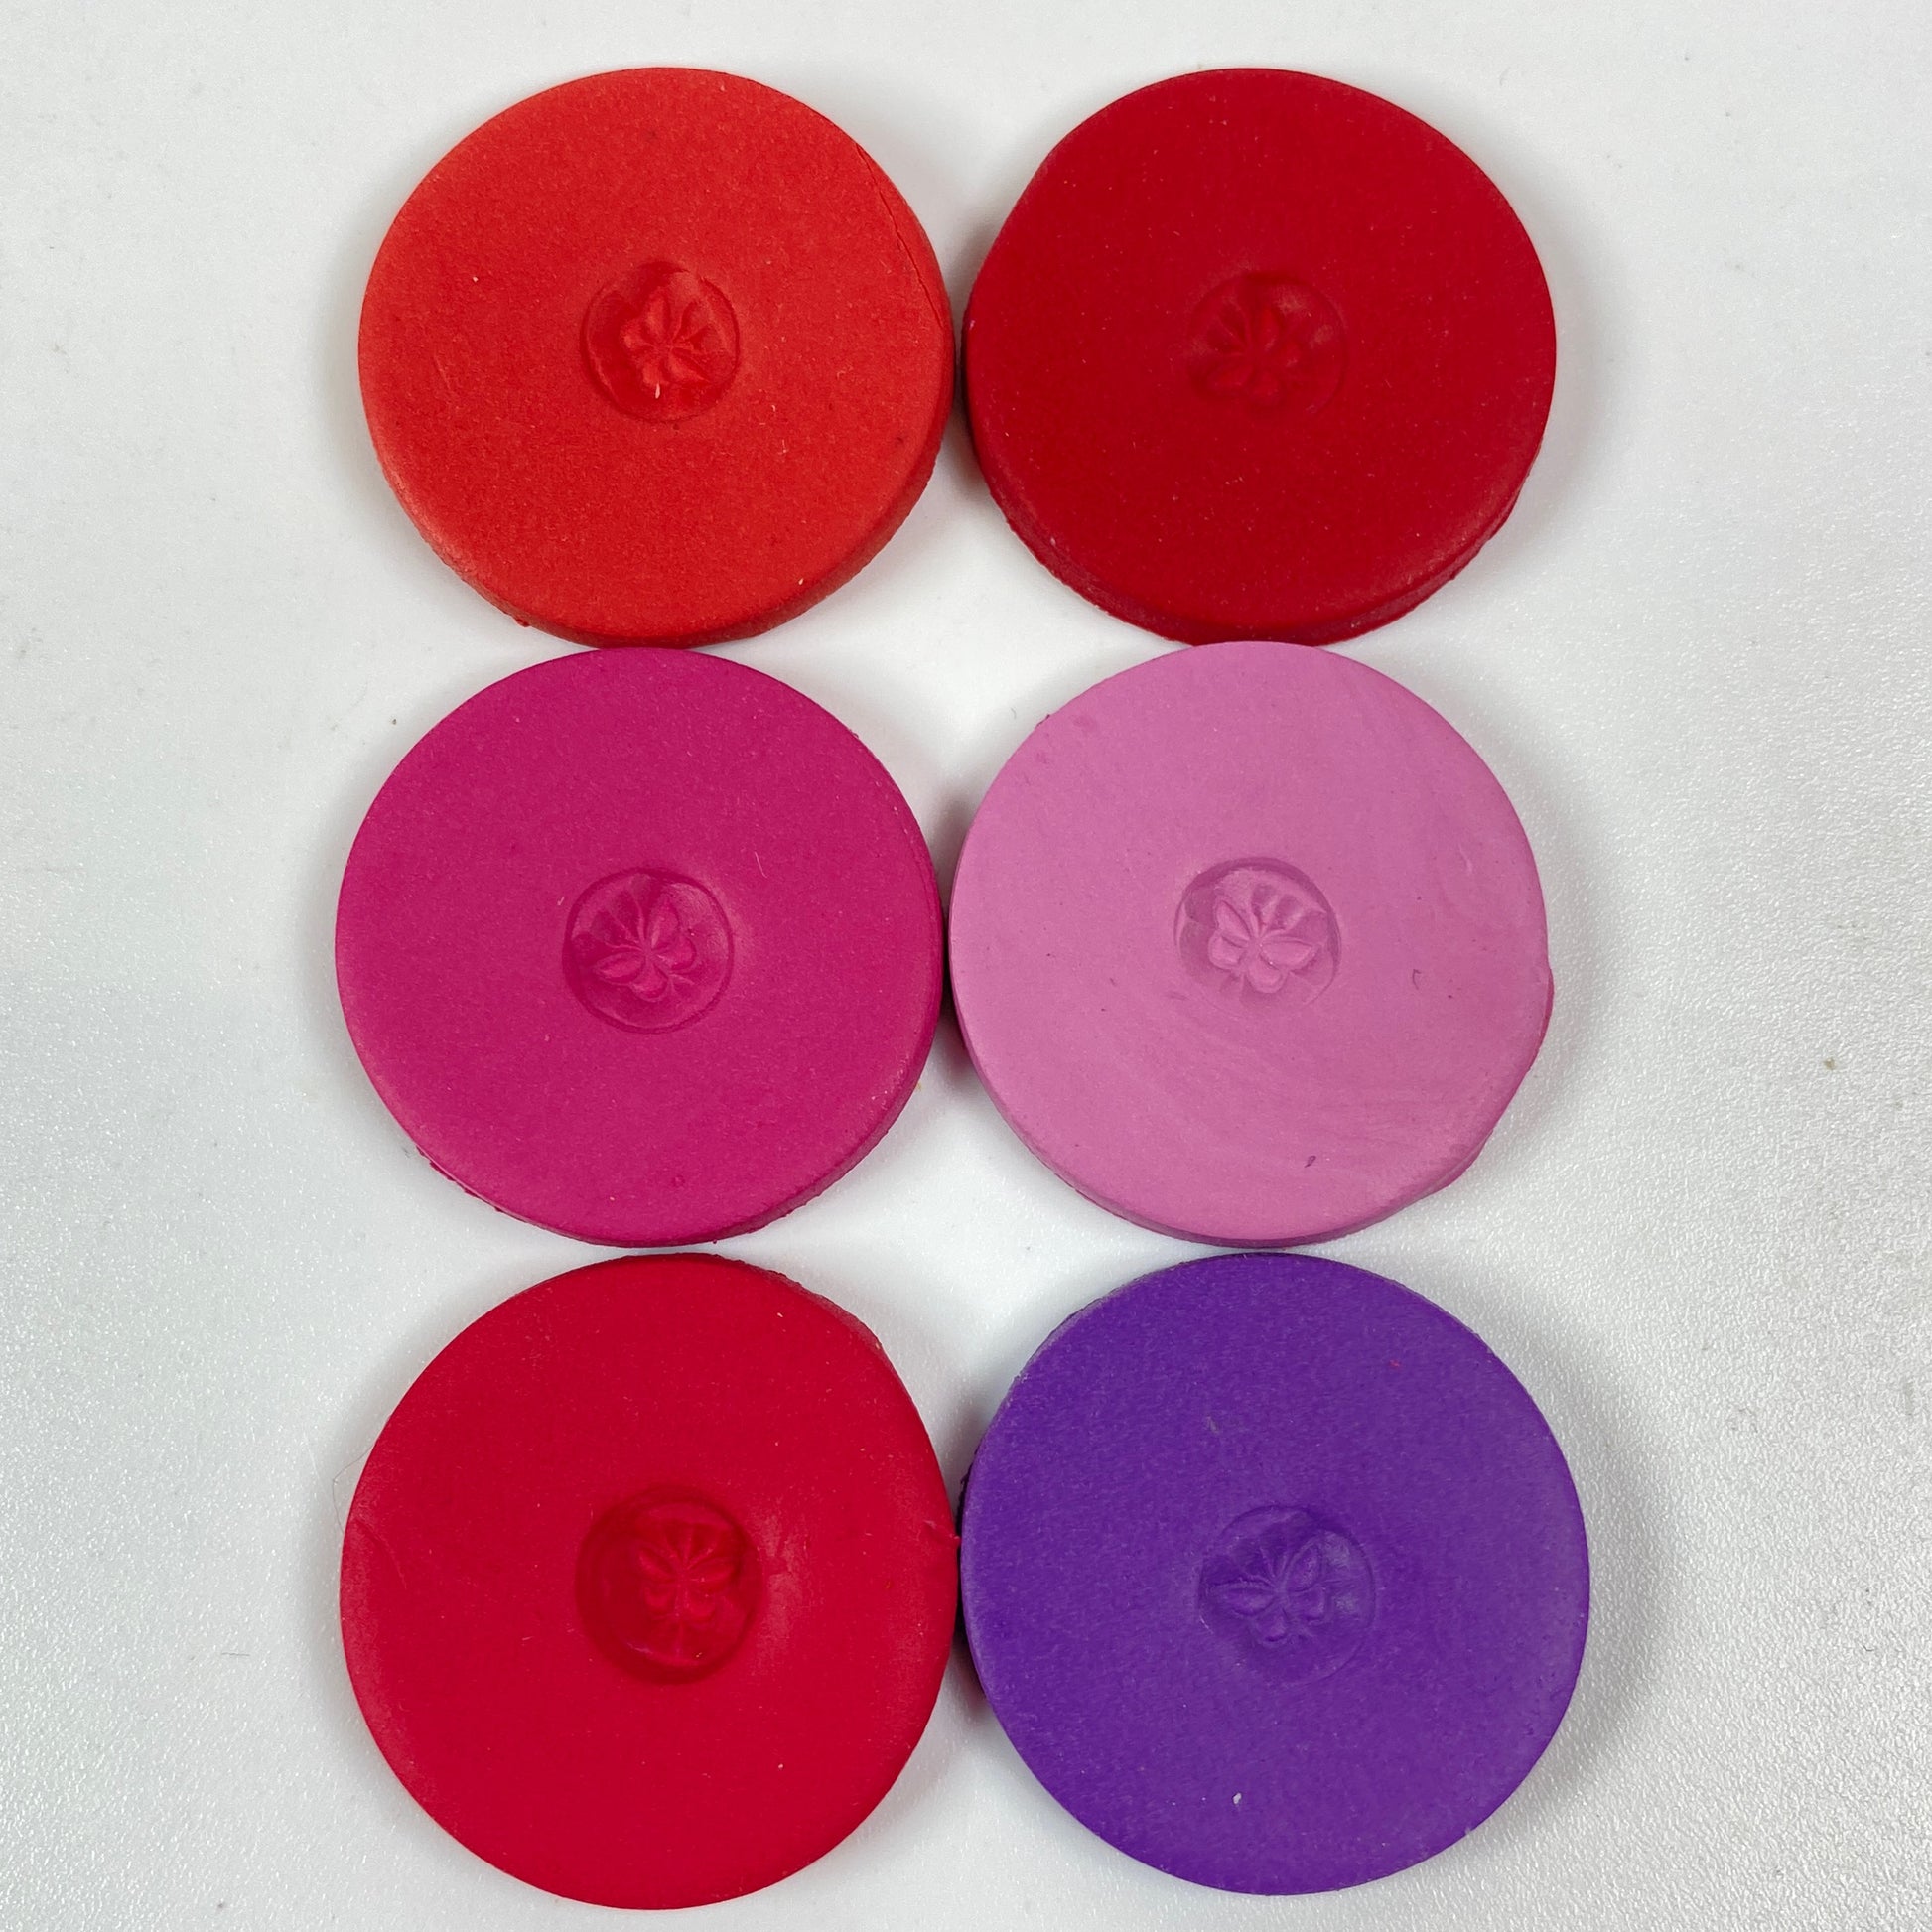 Discs of Polymer Clay in all 6 pink and purple colors of this palette, arranged 2 wide and 3 tall.